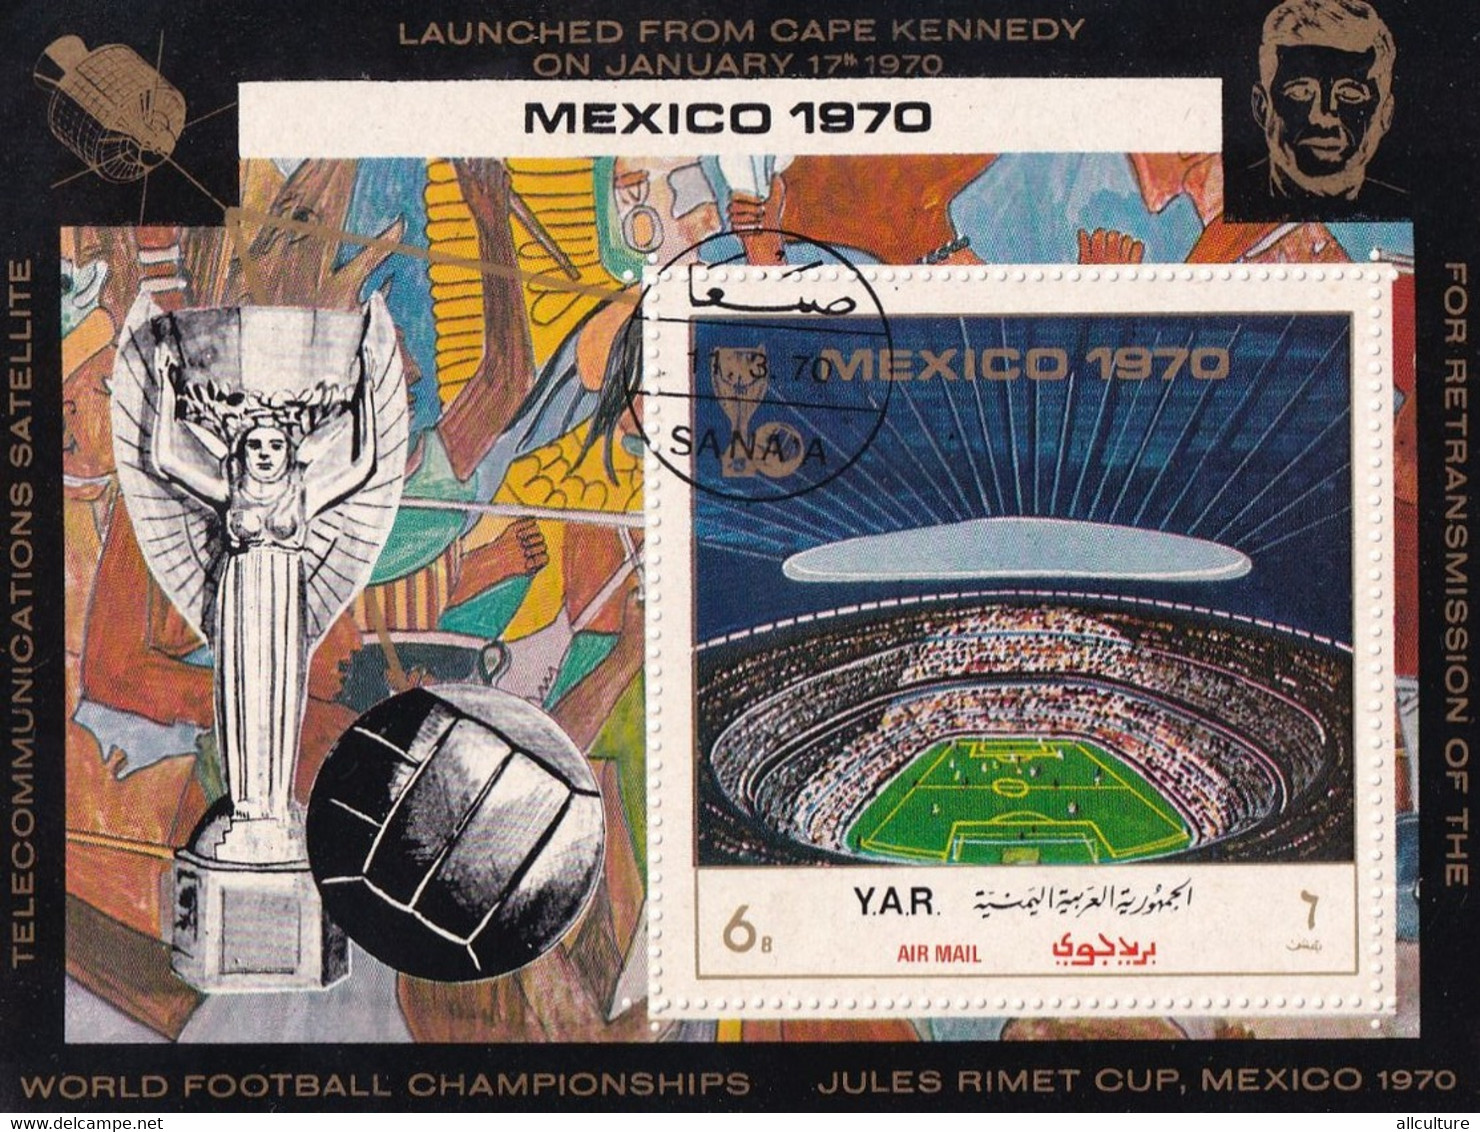 MEXICO 1970  LAUNCHED FROM CAPE KENNEDY ON JUANUARY 1970 JULES RIMET CUP  MNH - 1970 – Mexique